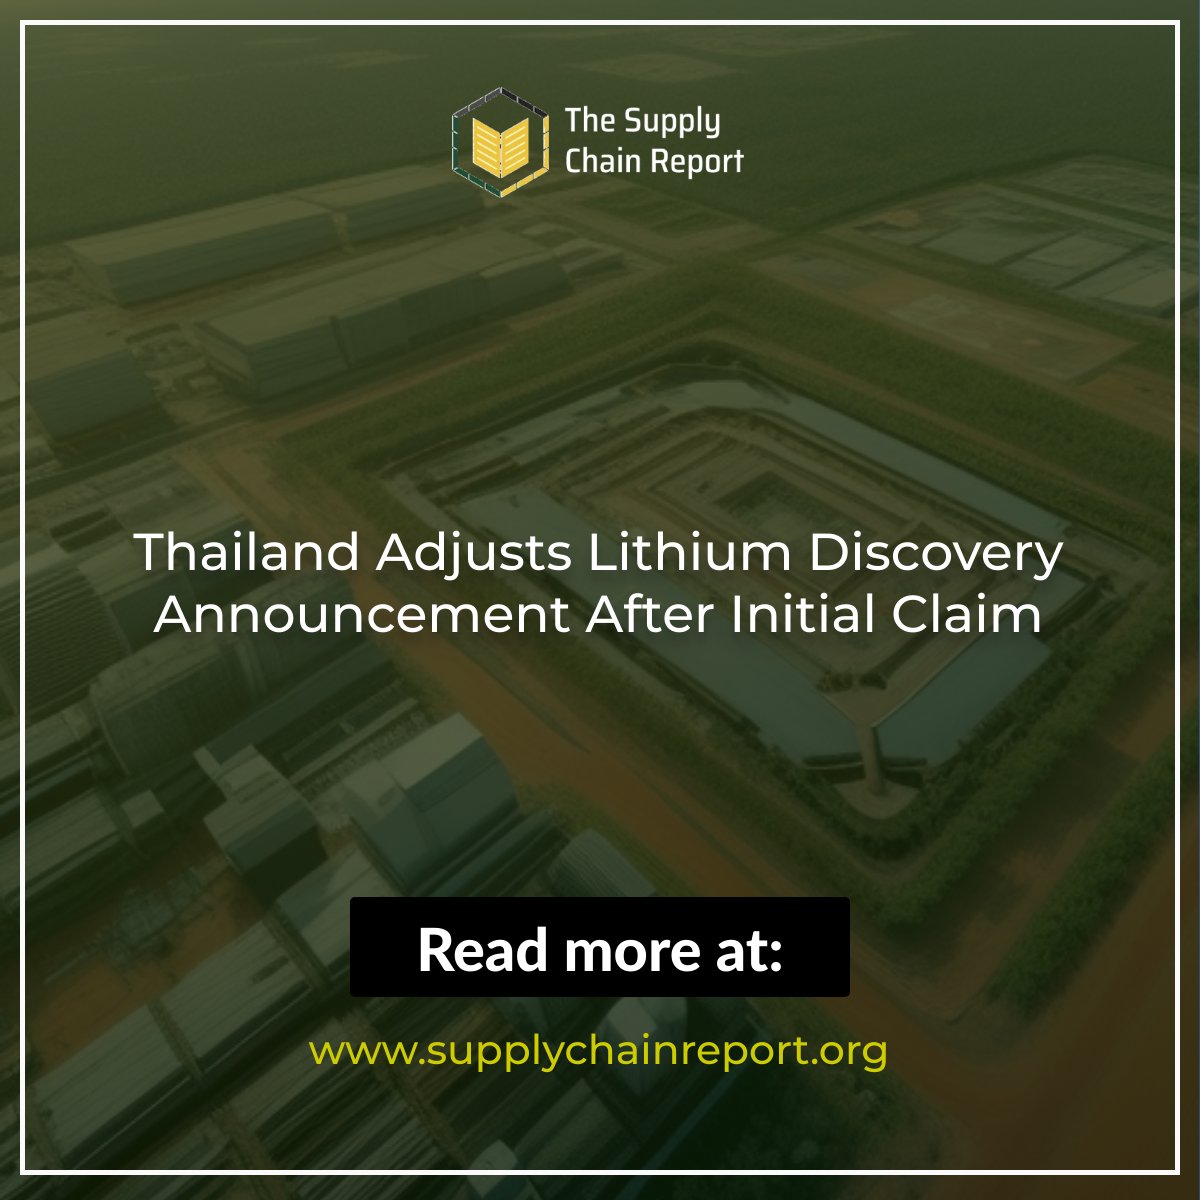 Thailand Adjusts Lithium Discovery Announcement After Initial Claim
Read more here: supplychainreport.org/thailand-adjus…
#TheSupplyChainReport #thailand #lithiumdiscovery